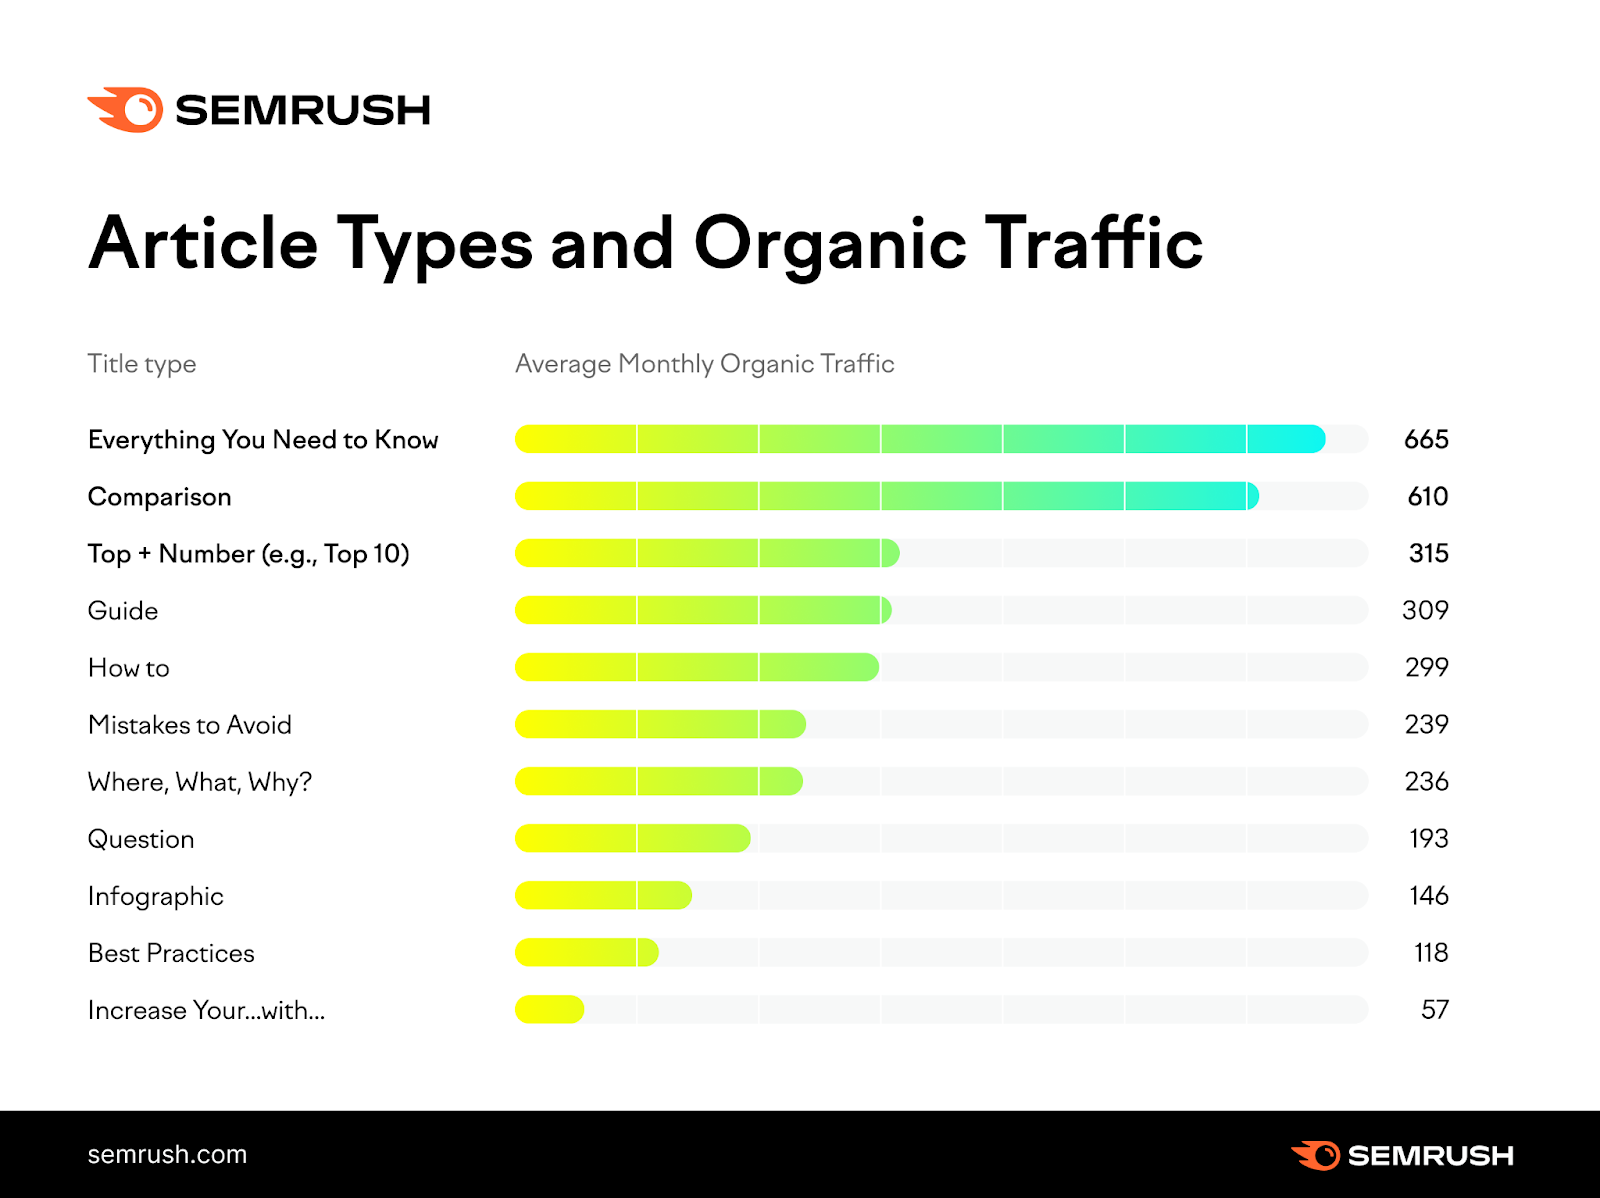 Article types and ،ic traffic